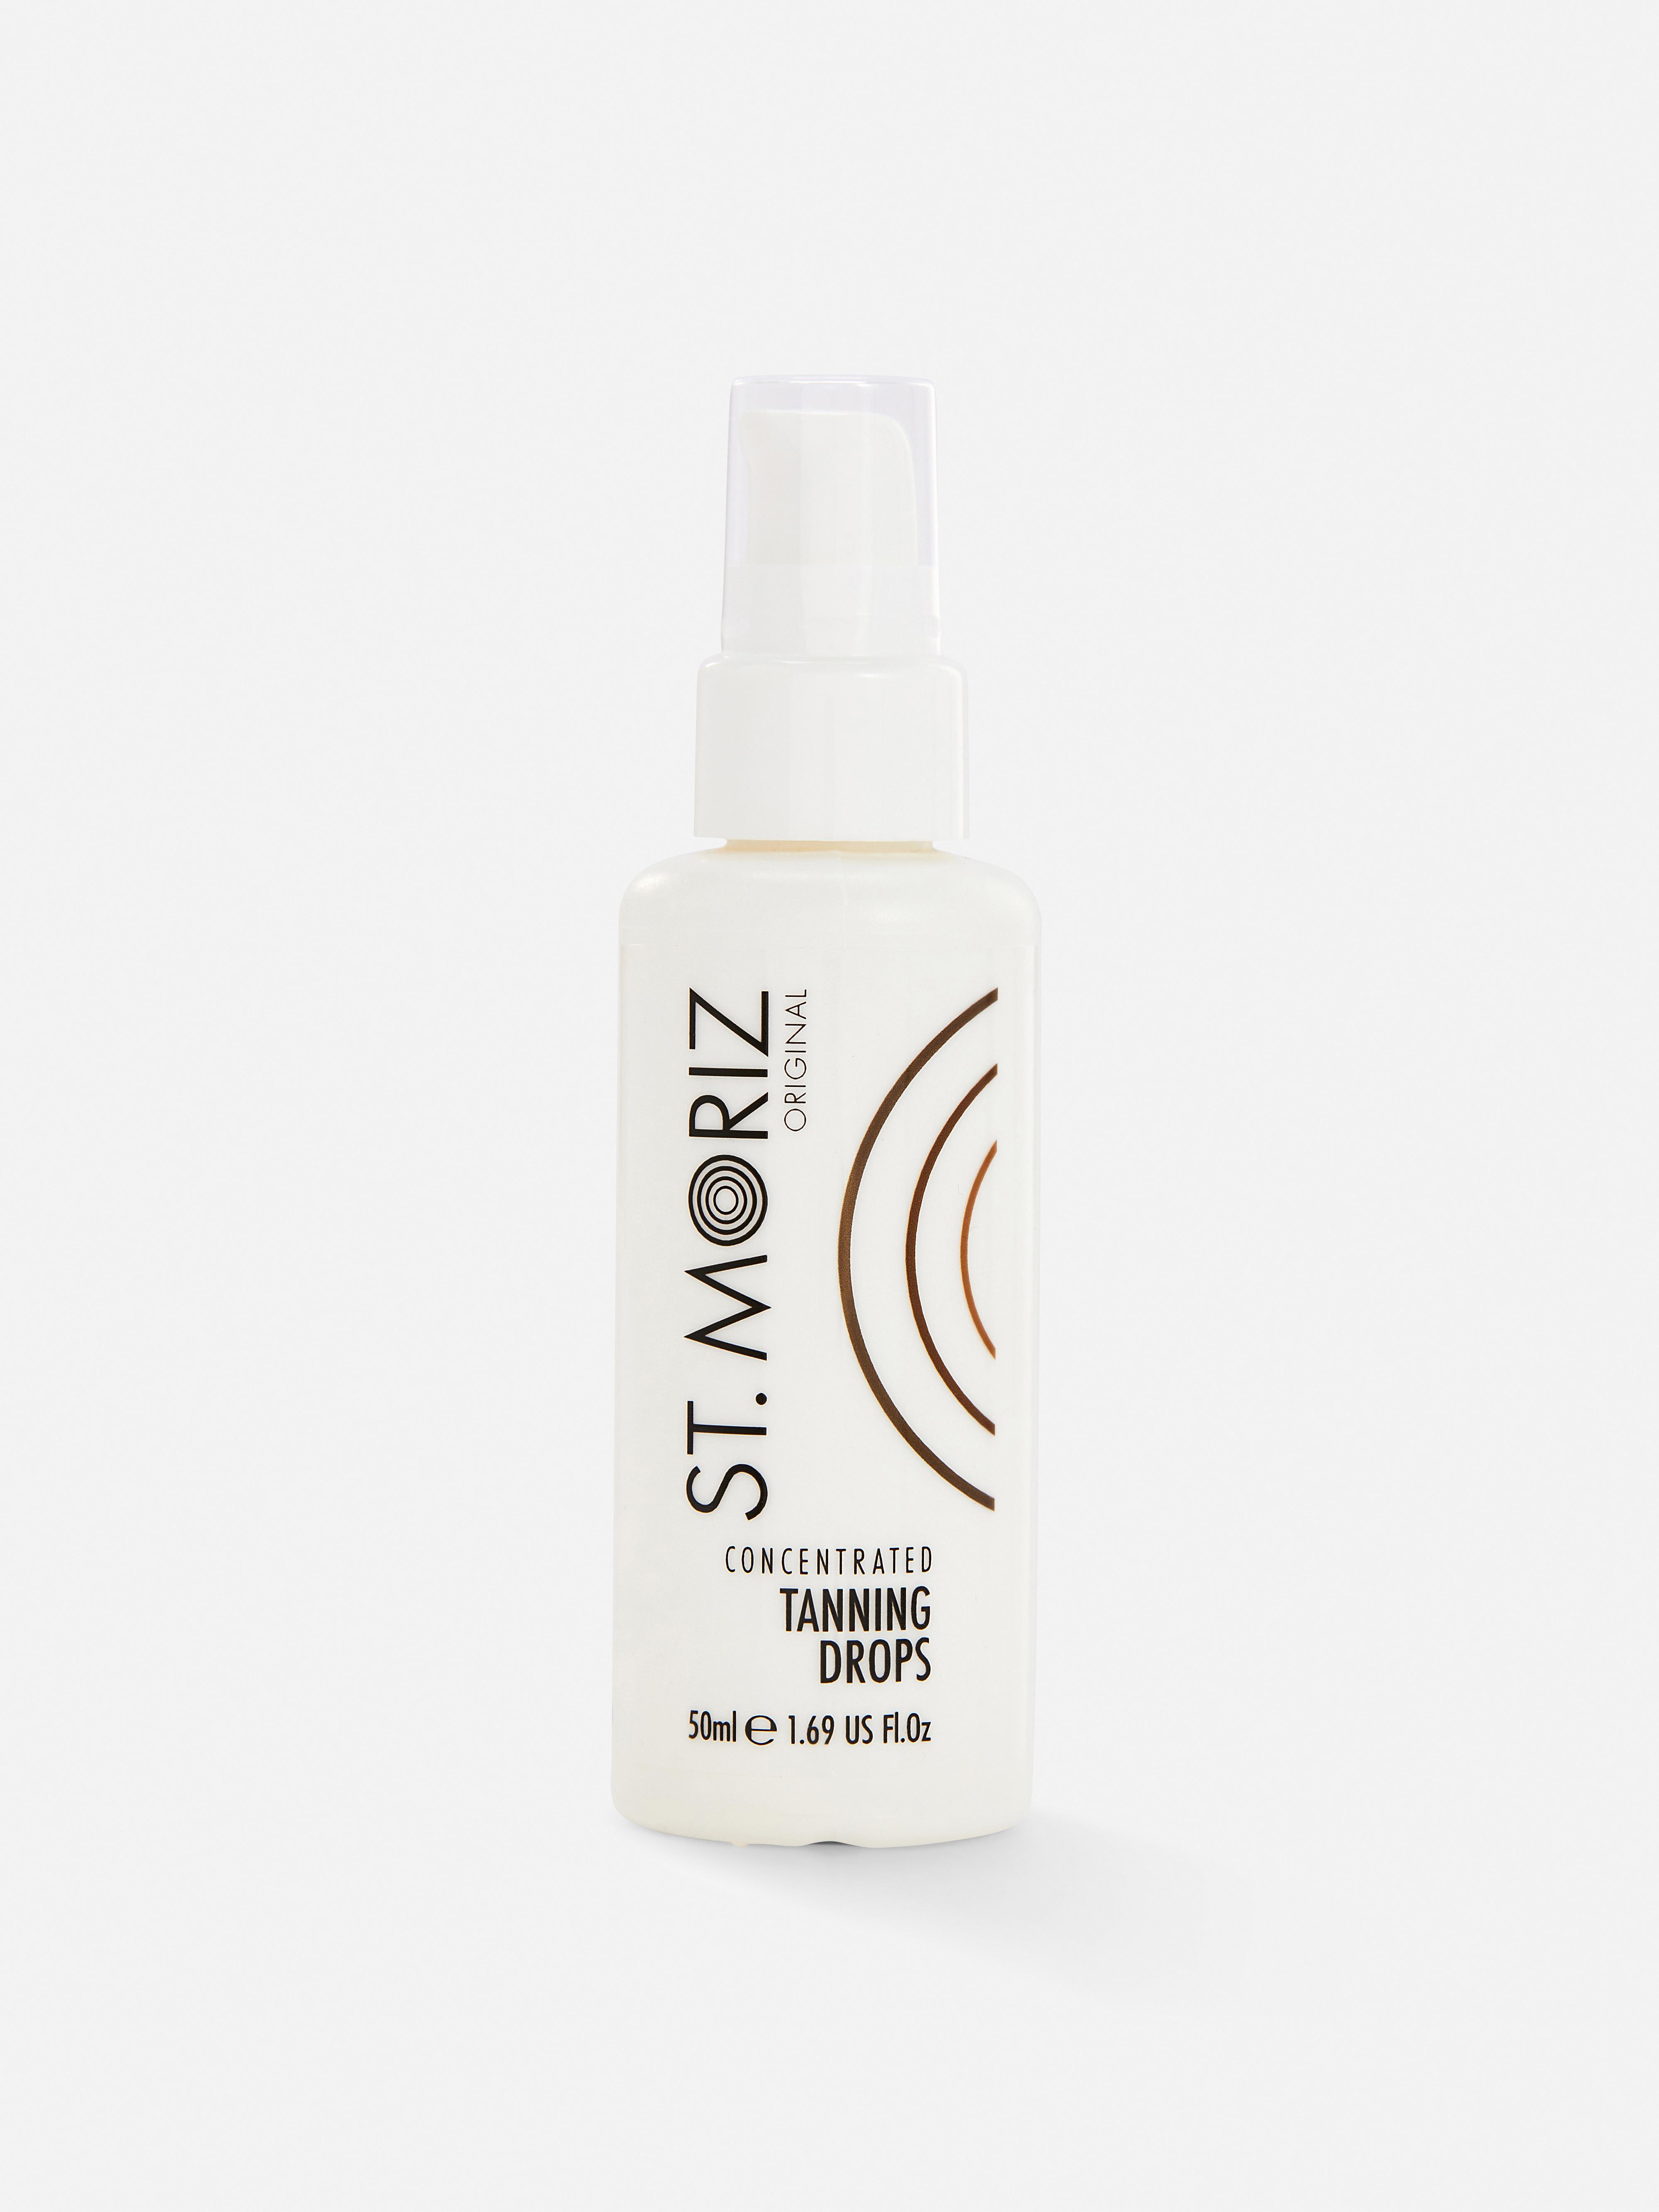 St. Moriz Concentrated Tanning Drops